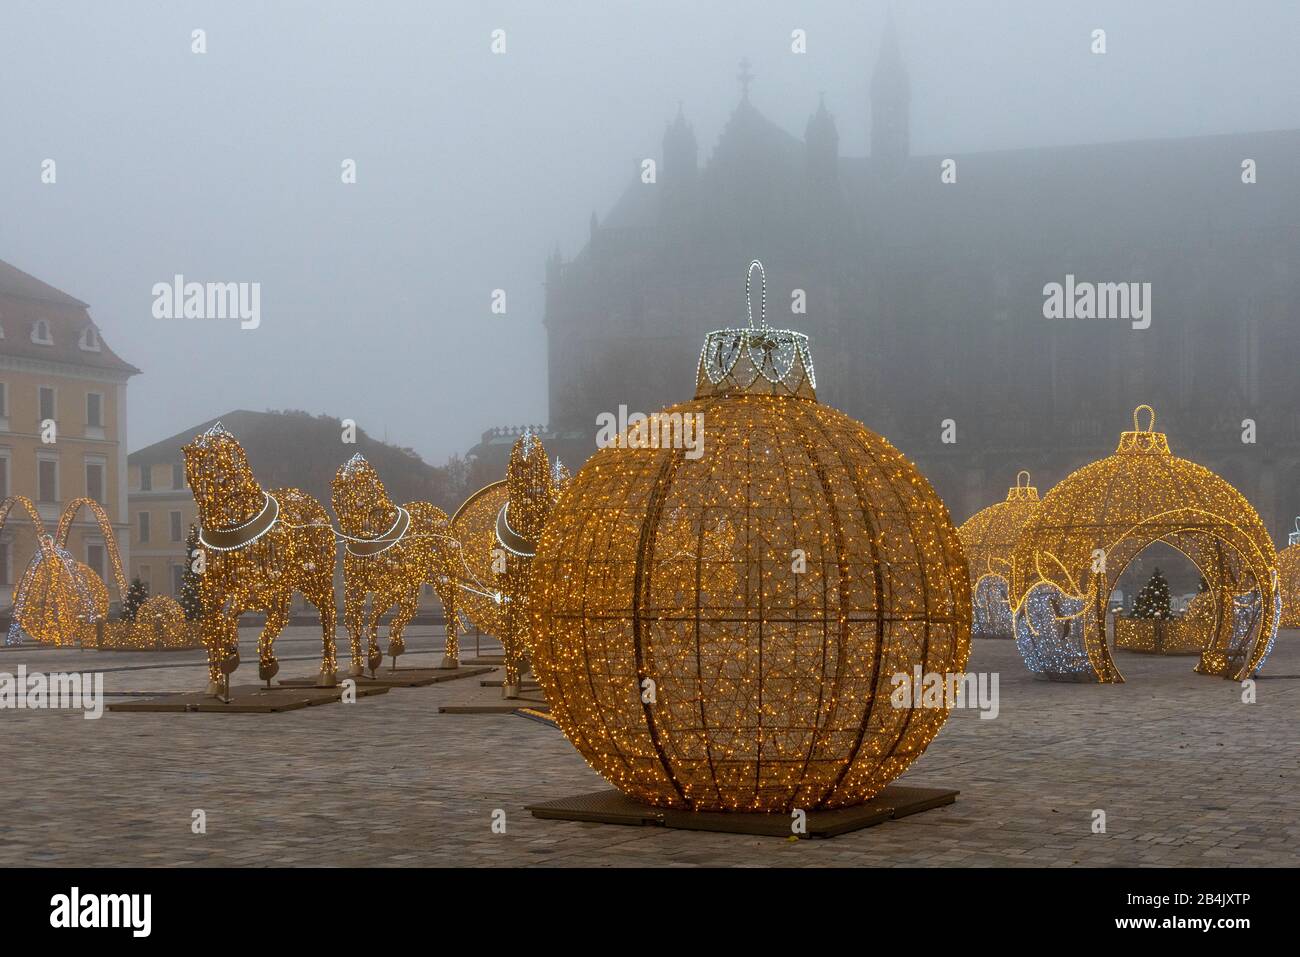 Germany, Saxony-Anhalt, Magdeburg, oversized Christmas balls and horses following the hemisphere attempt of the physicist Otto-von-Guericke stand on the cathedral square in Magdeburg. They belong to the world of lights in the city. In Advent, dozens of figures shine in Magdeburg, consisting of one million LED lights. They were made by the Polish company Multidekor. Stock Photo